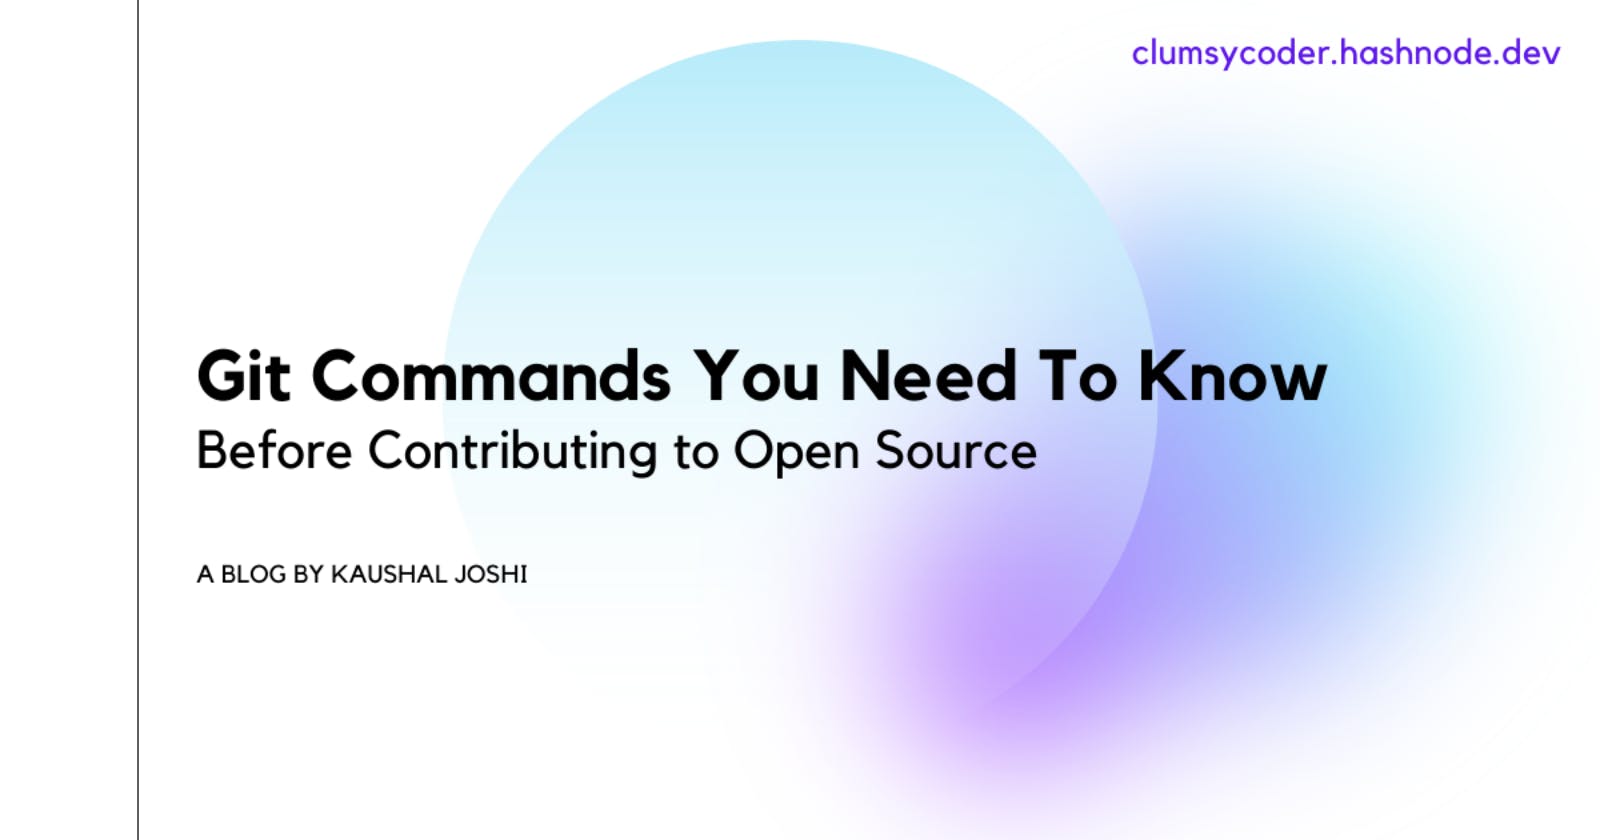 Git Commands You Need To Know Before Contributing to Open Source